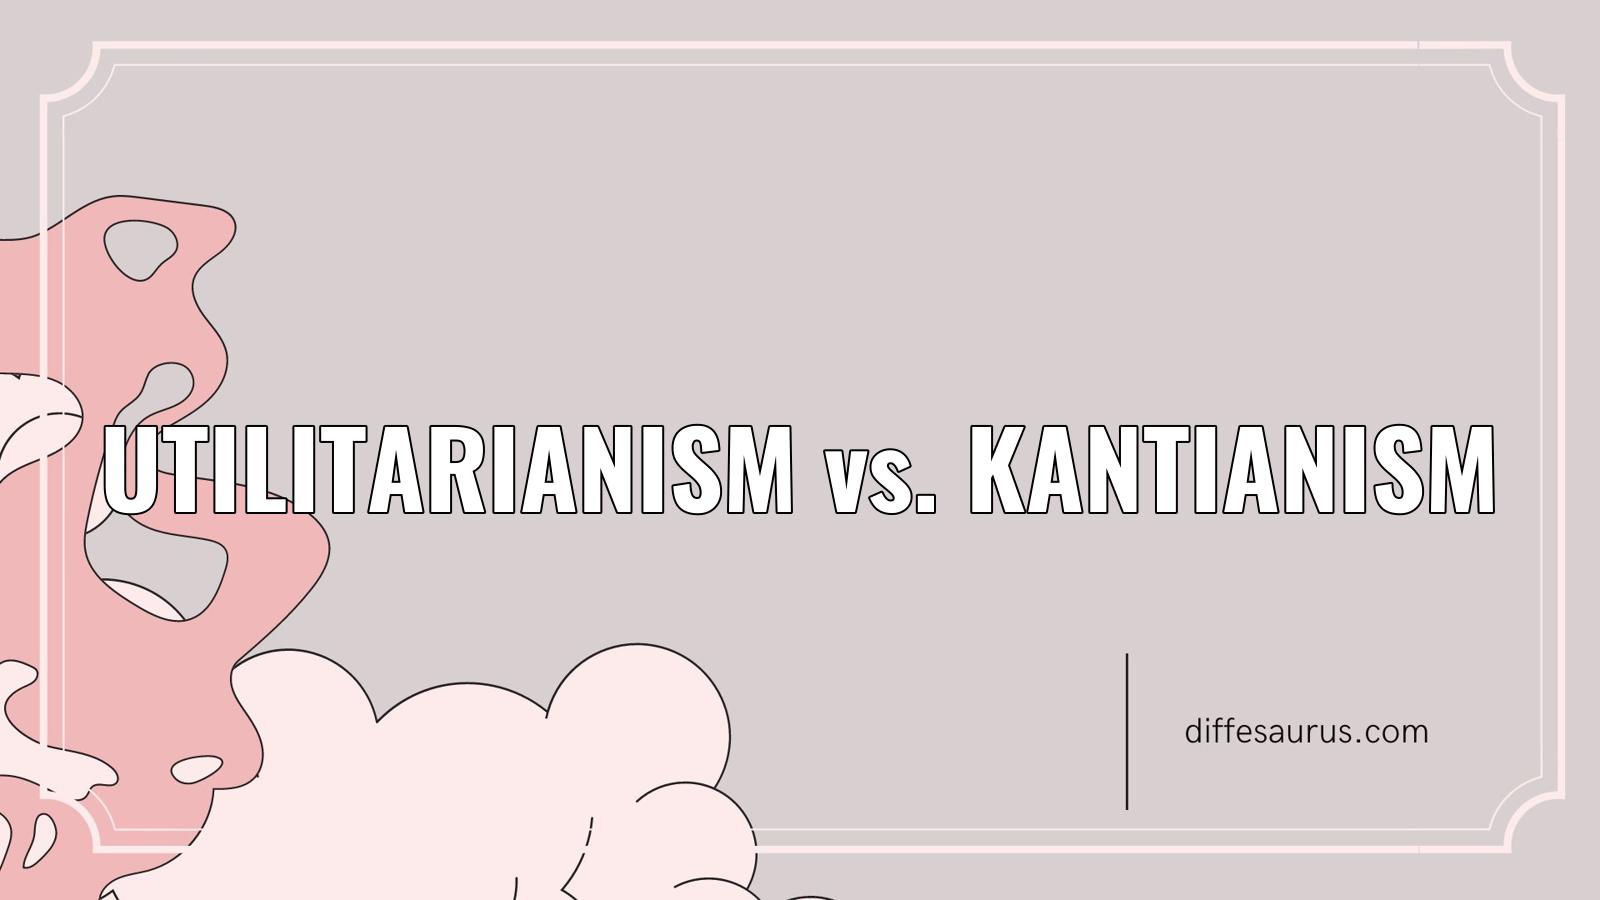 You are currently viewing Utilitarianism vs. Kantianism: All Differences Explained